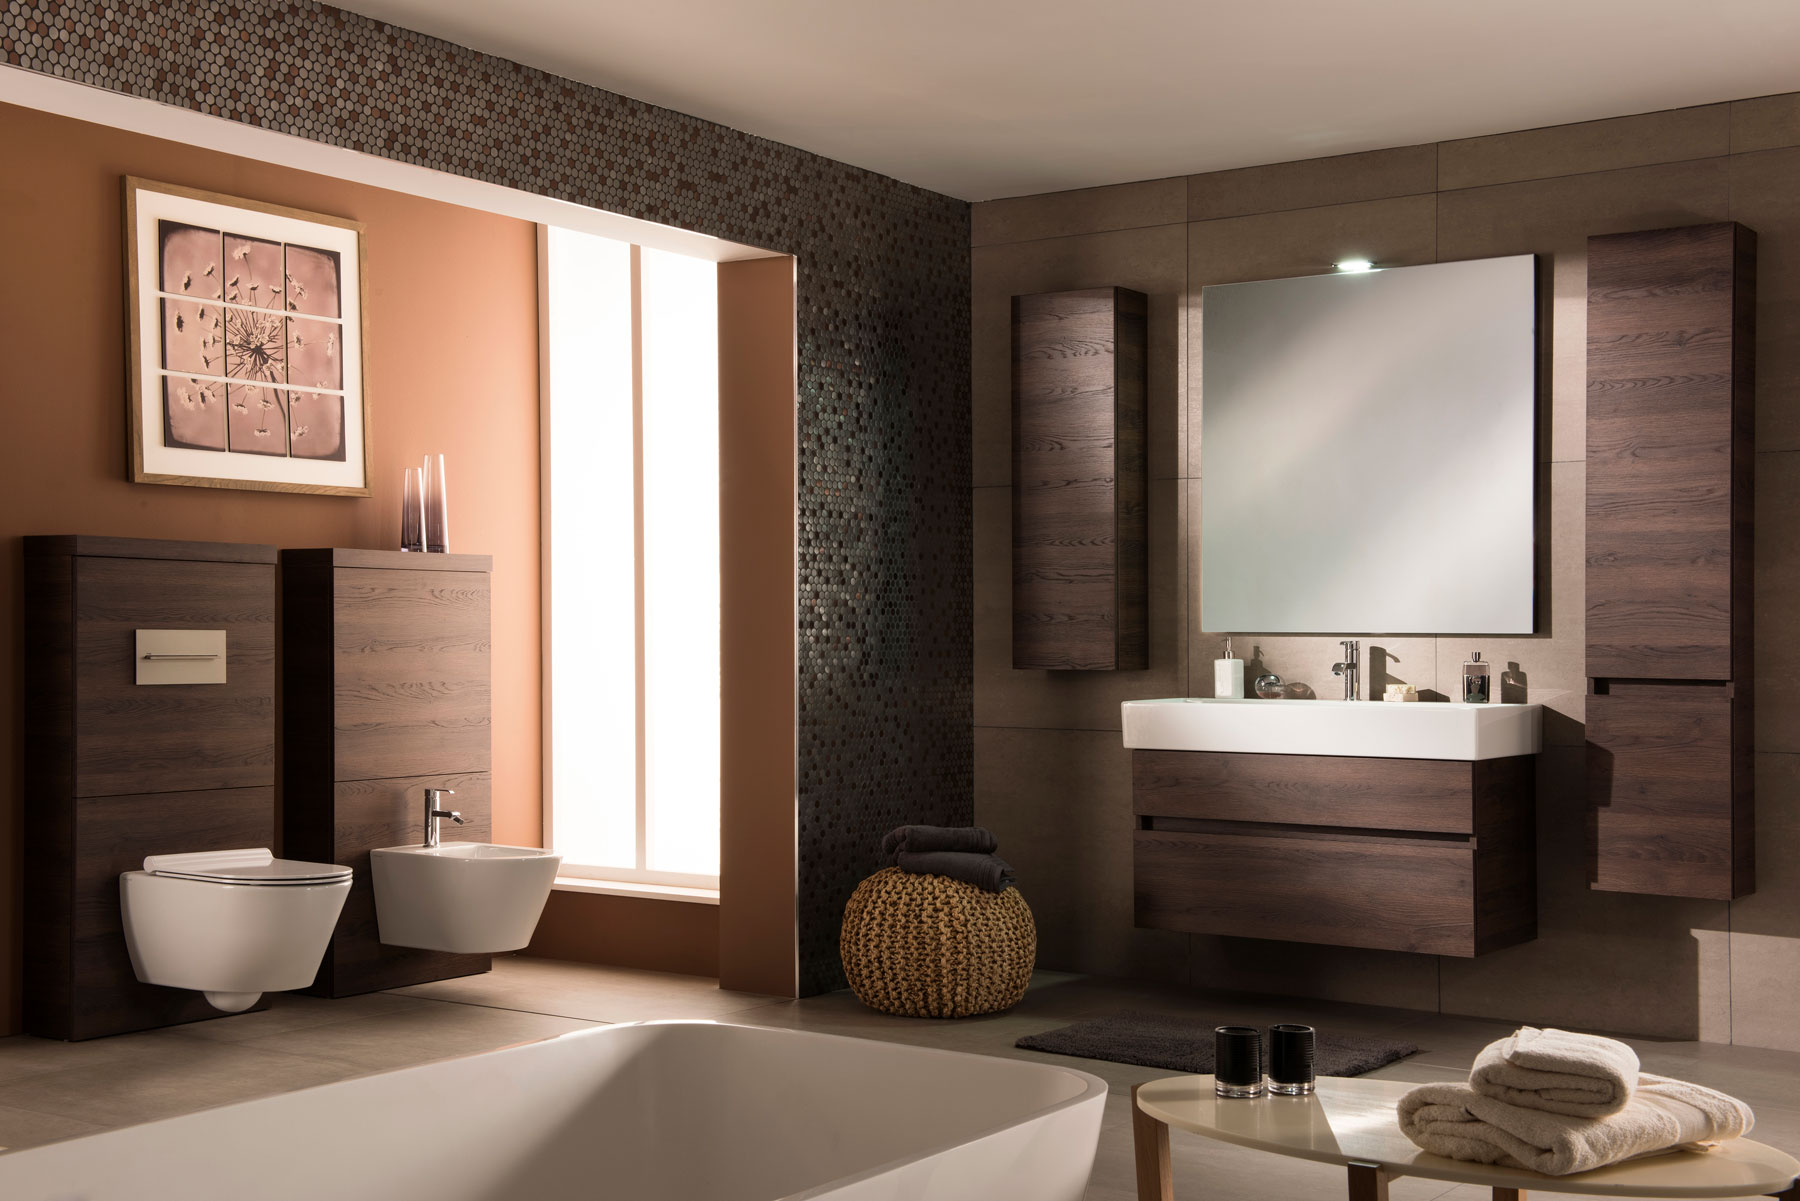 Catalano Bathroom Furniture & Toilets – Shop today at the BEST UK PRICES!!